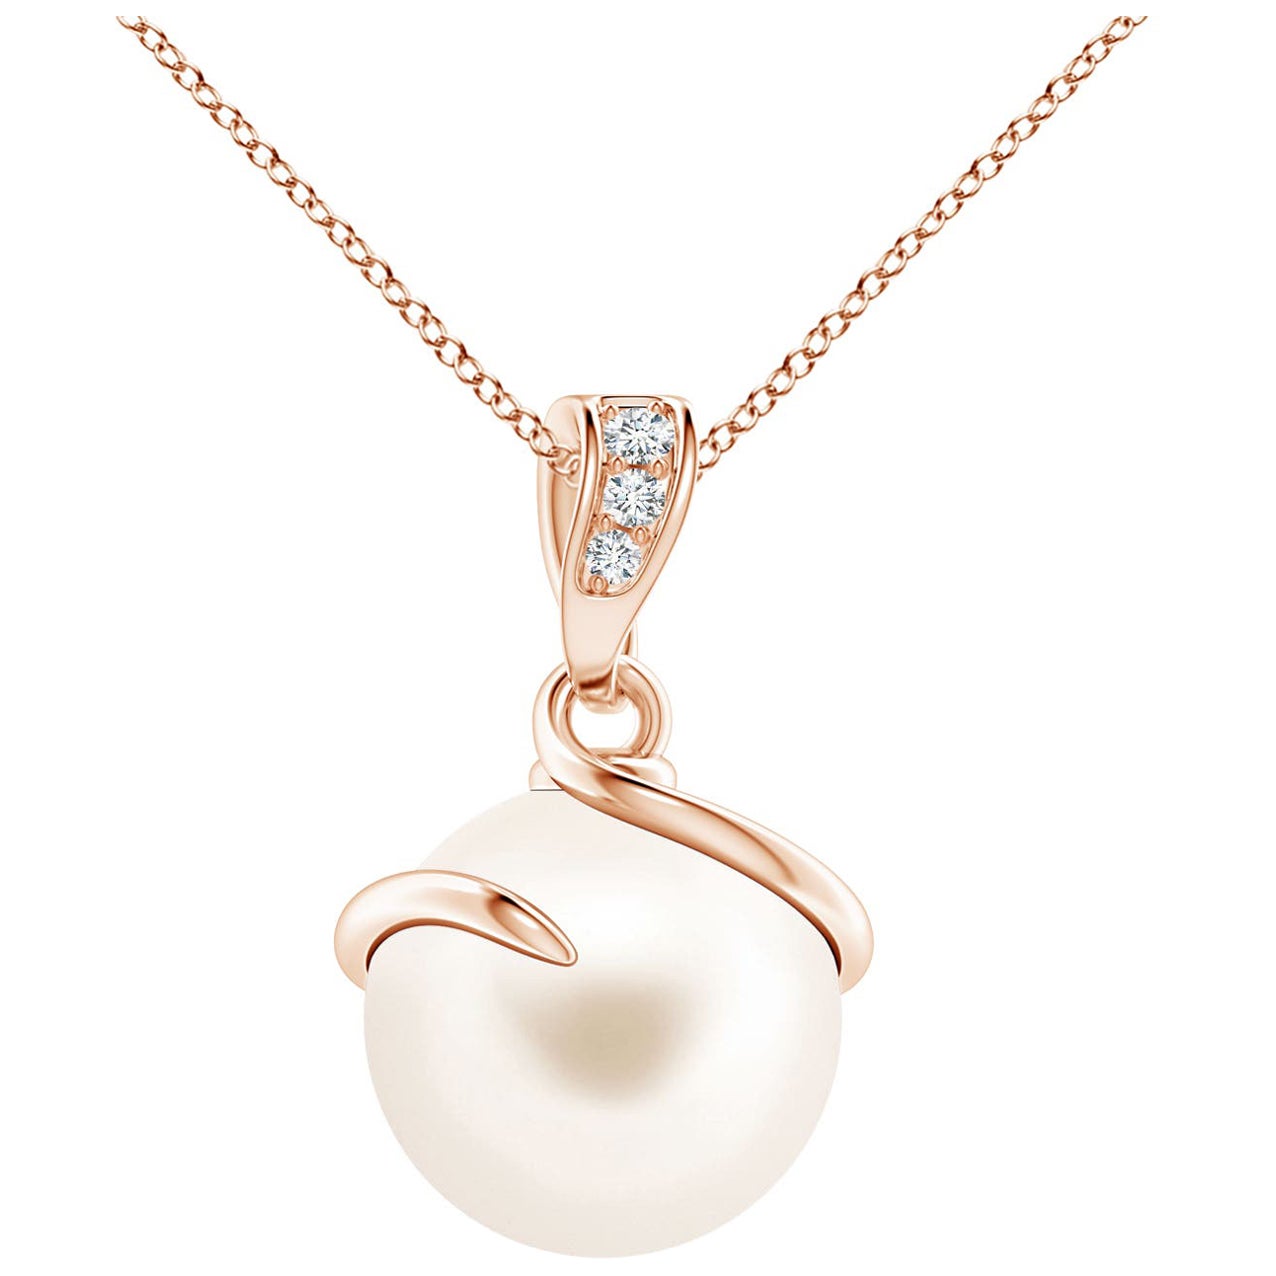 Freshwater Cultured Pearl Spiral Pendant with Diamonds in 14K Rose Gold